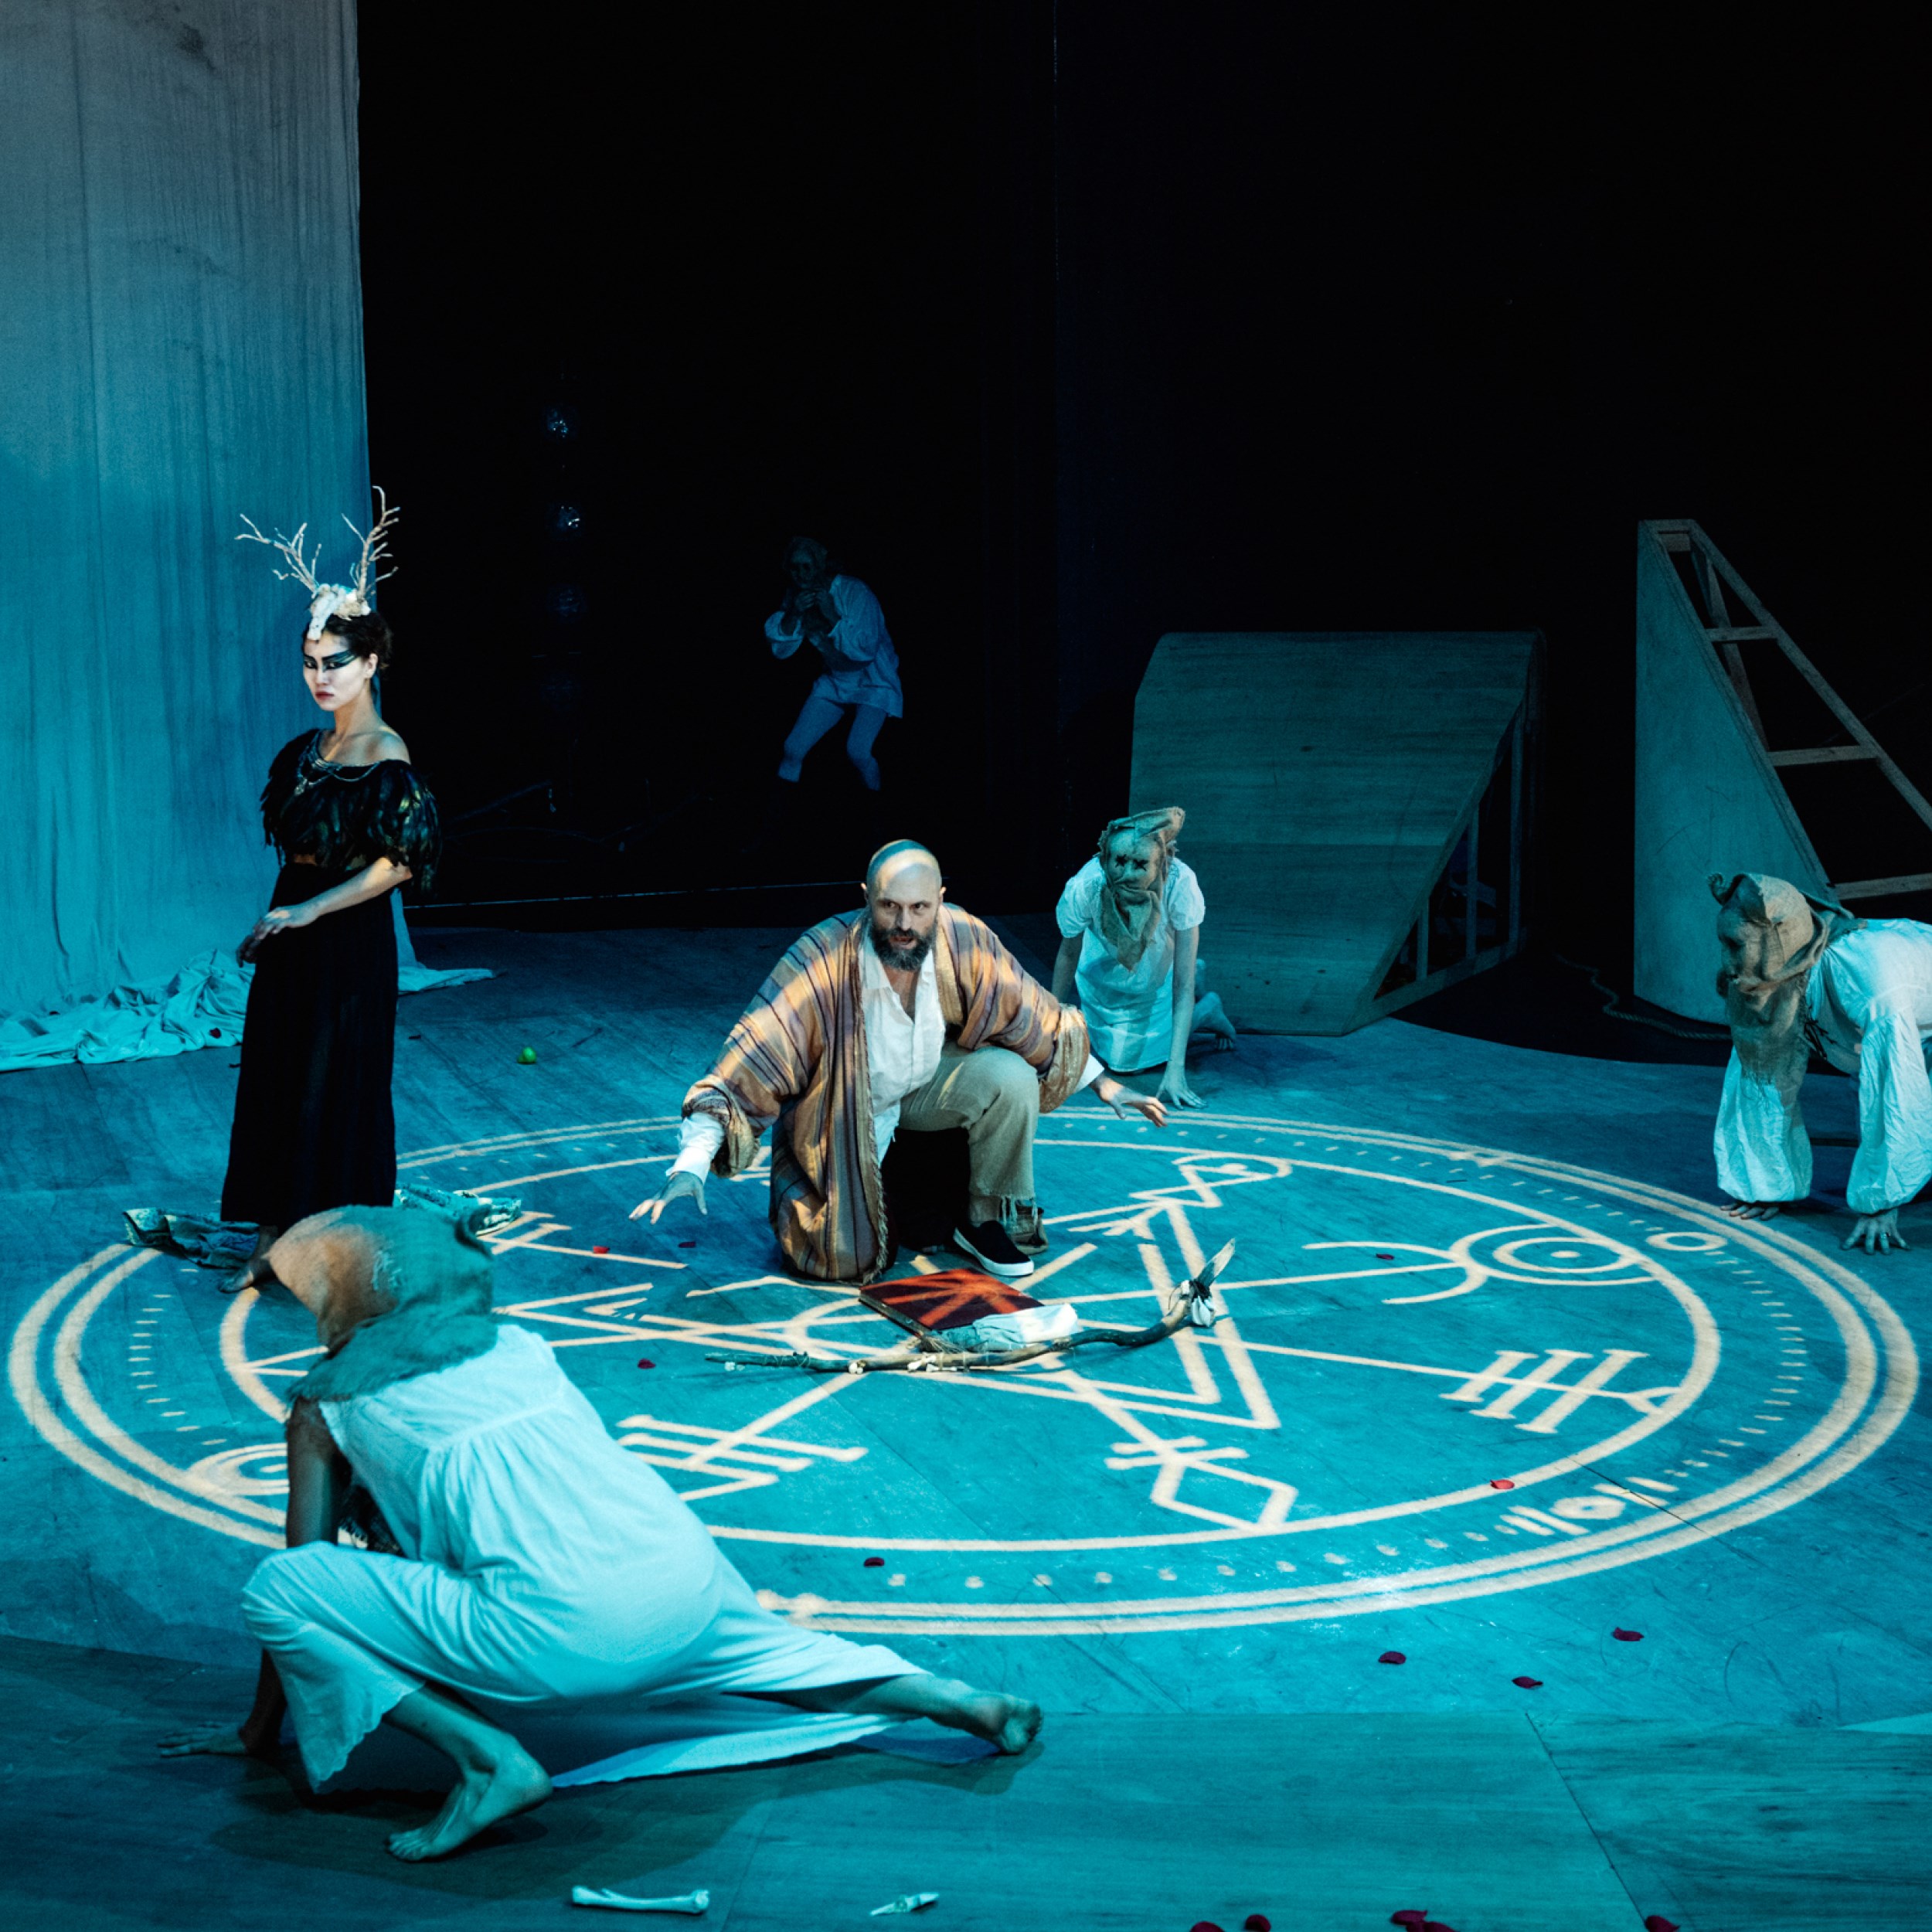 Promotional image of The Tempest/Hag-Seed Symposium for Seymour Centres Arts Education Program depicting a group of players gathered around a symbol projected onto the floor.